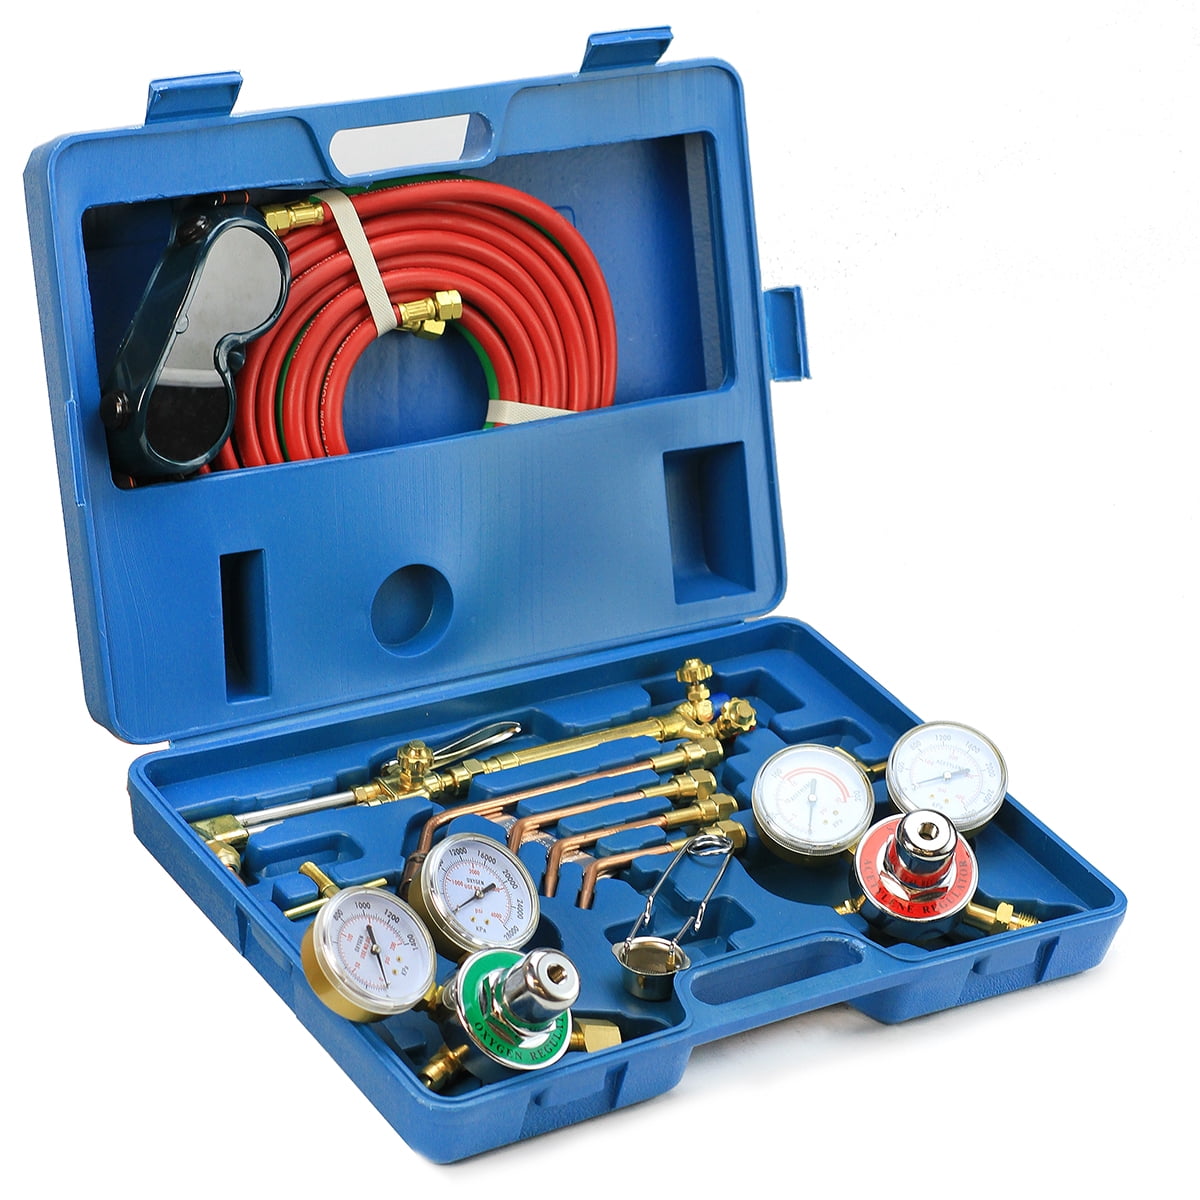 Oxygen Acetylene Welding Cutting Set Nightcore 17 PCs Portable Gas Welding Cutting Torch Kit Rosebud Heating Tip Goggles & Case Professional Precision Brazing Soldering Tool with Hose 